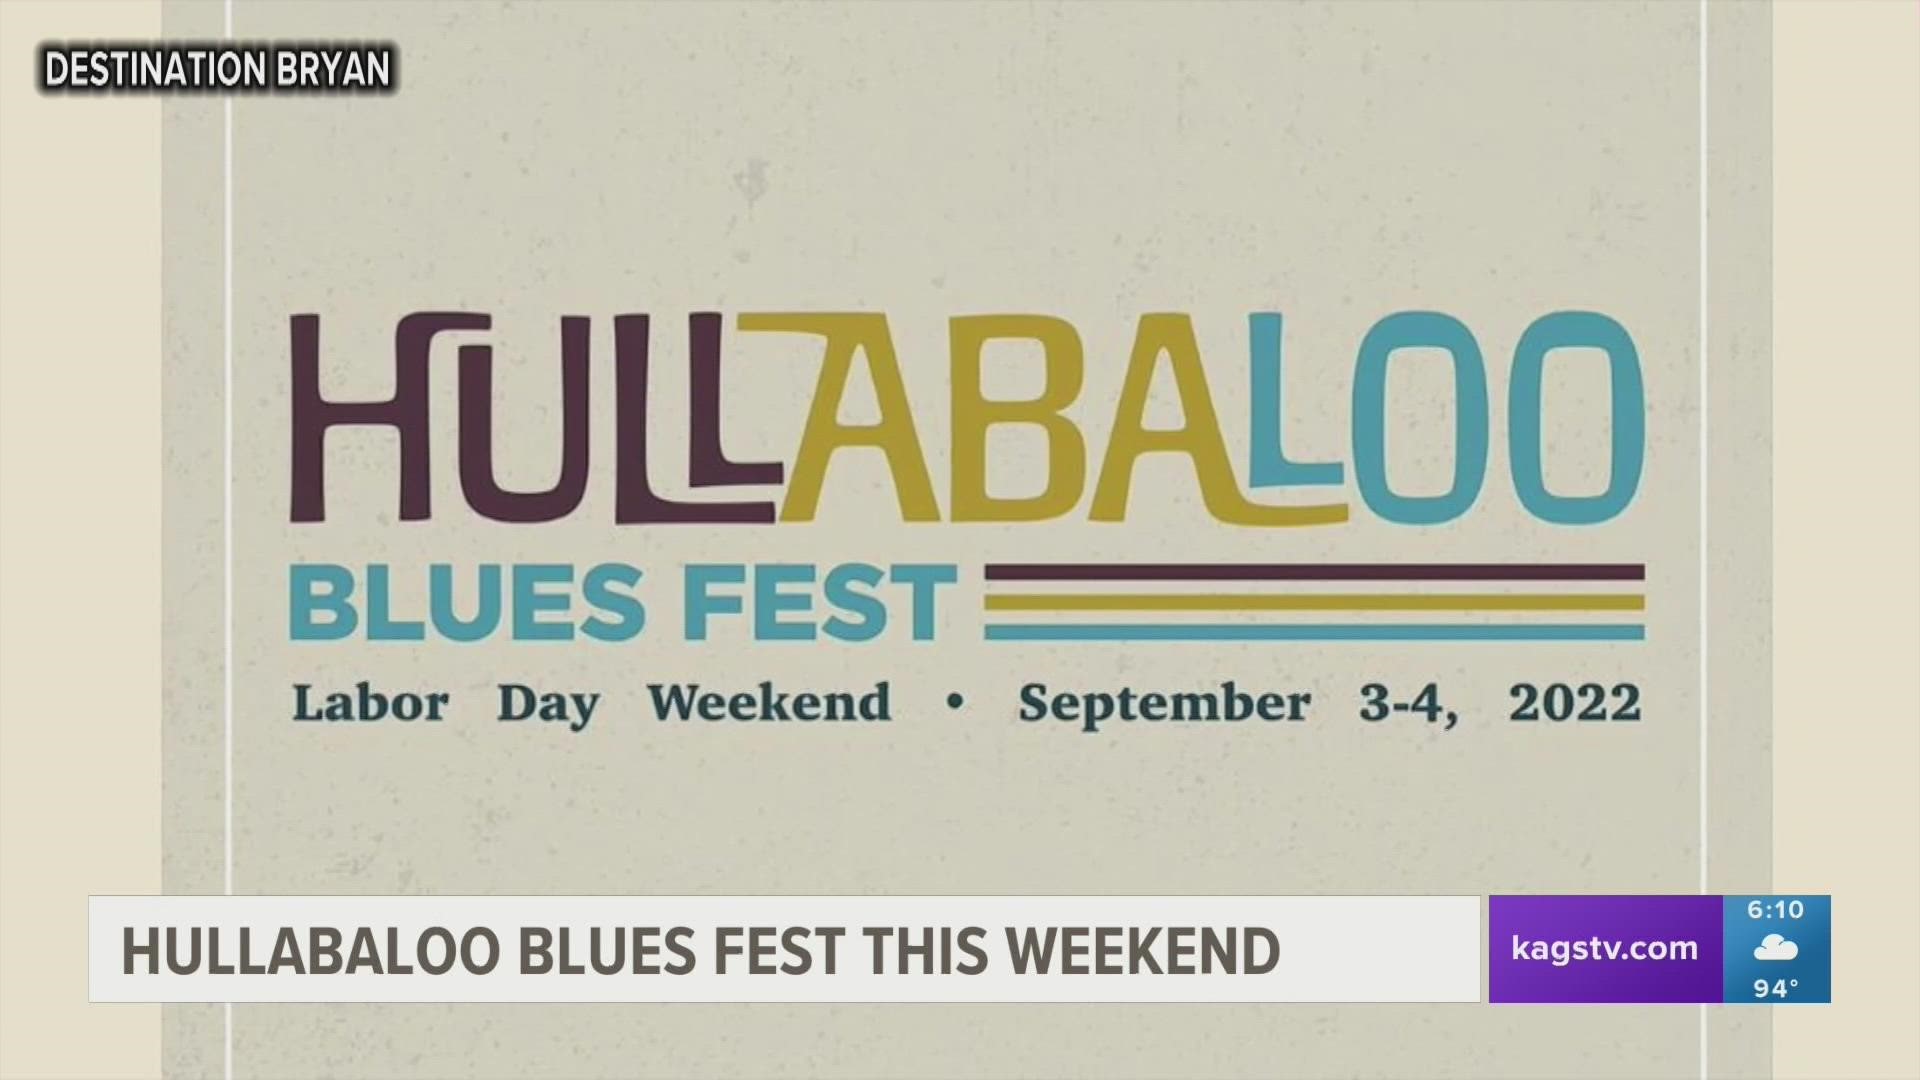 Amanda Kile, the Tourism Event Coordinator, said that this is the second year Destination Bryan is hosting the Hullabaloo Blues Fest.